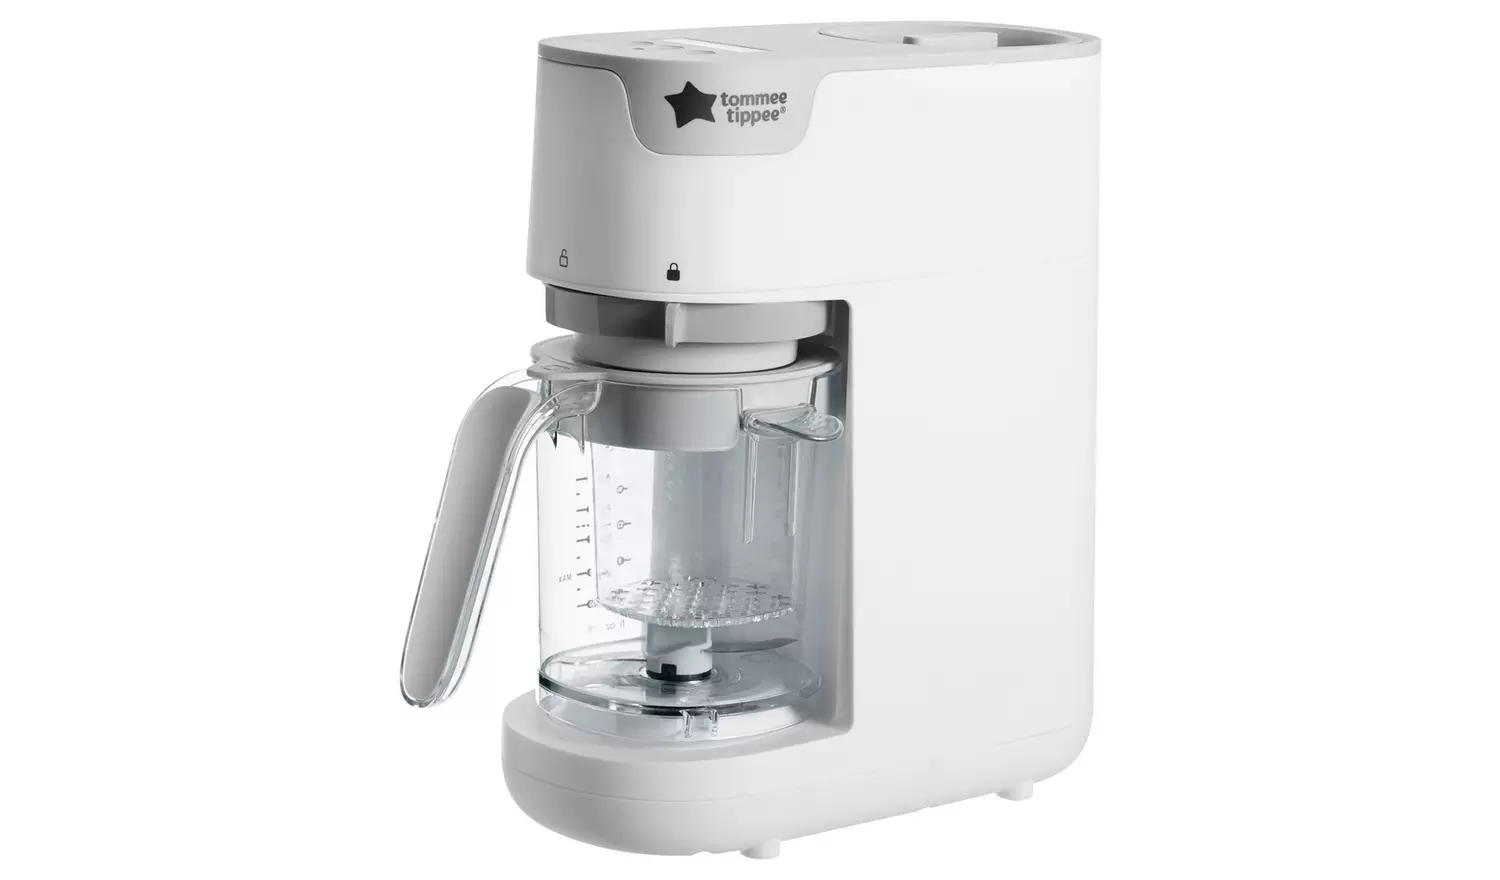 Tommee Tippee Quick-Cook Baby Food Blender